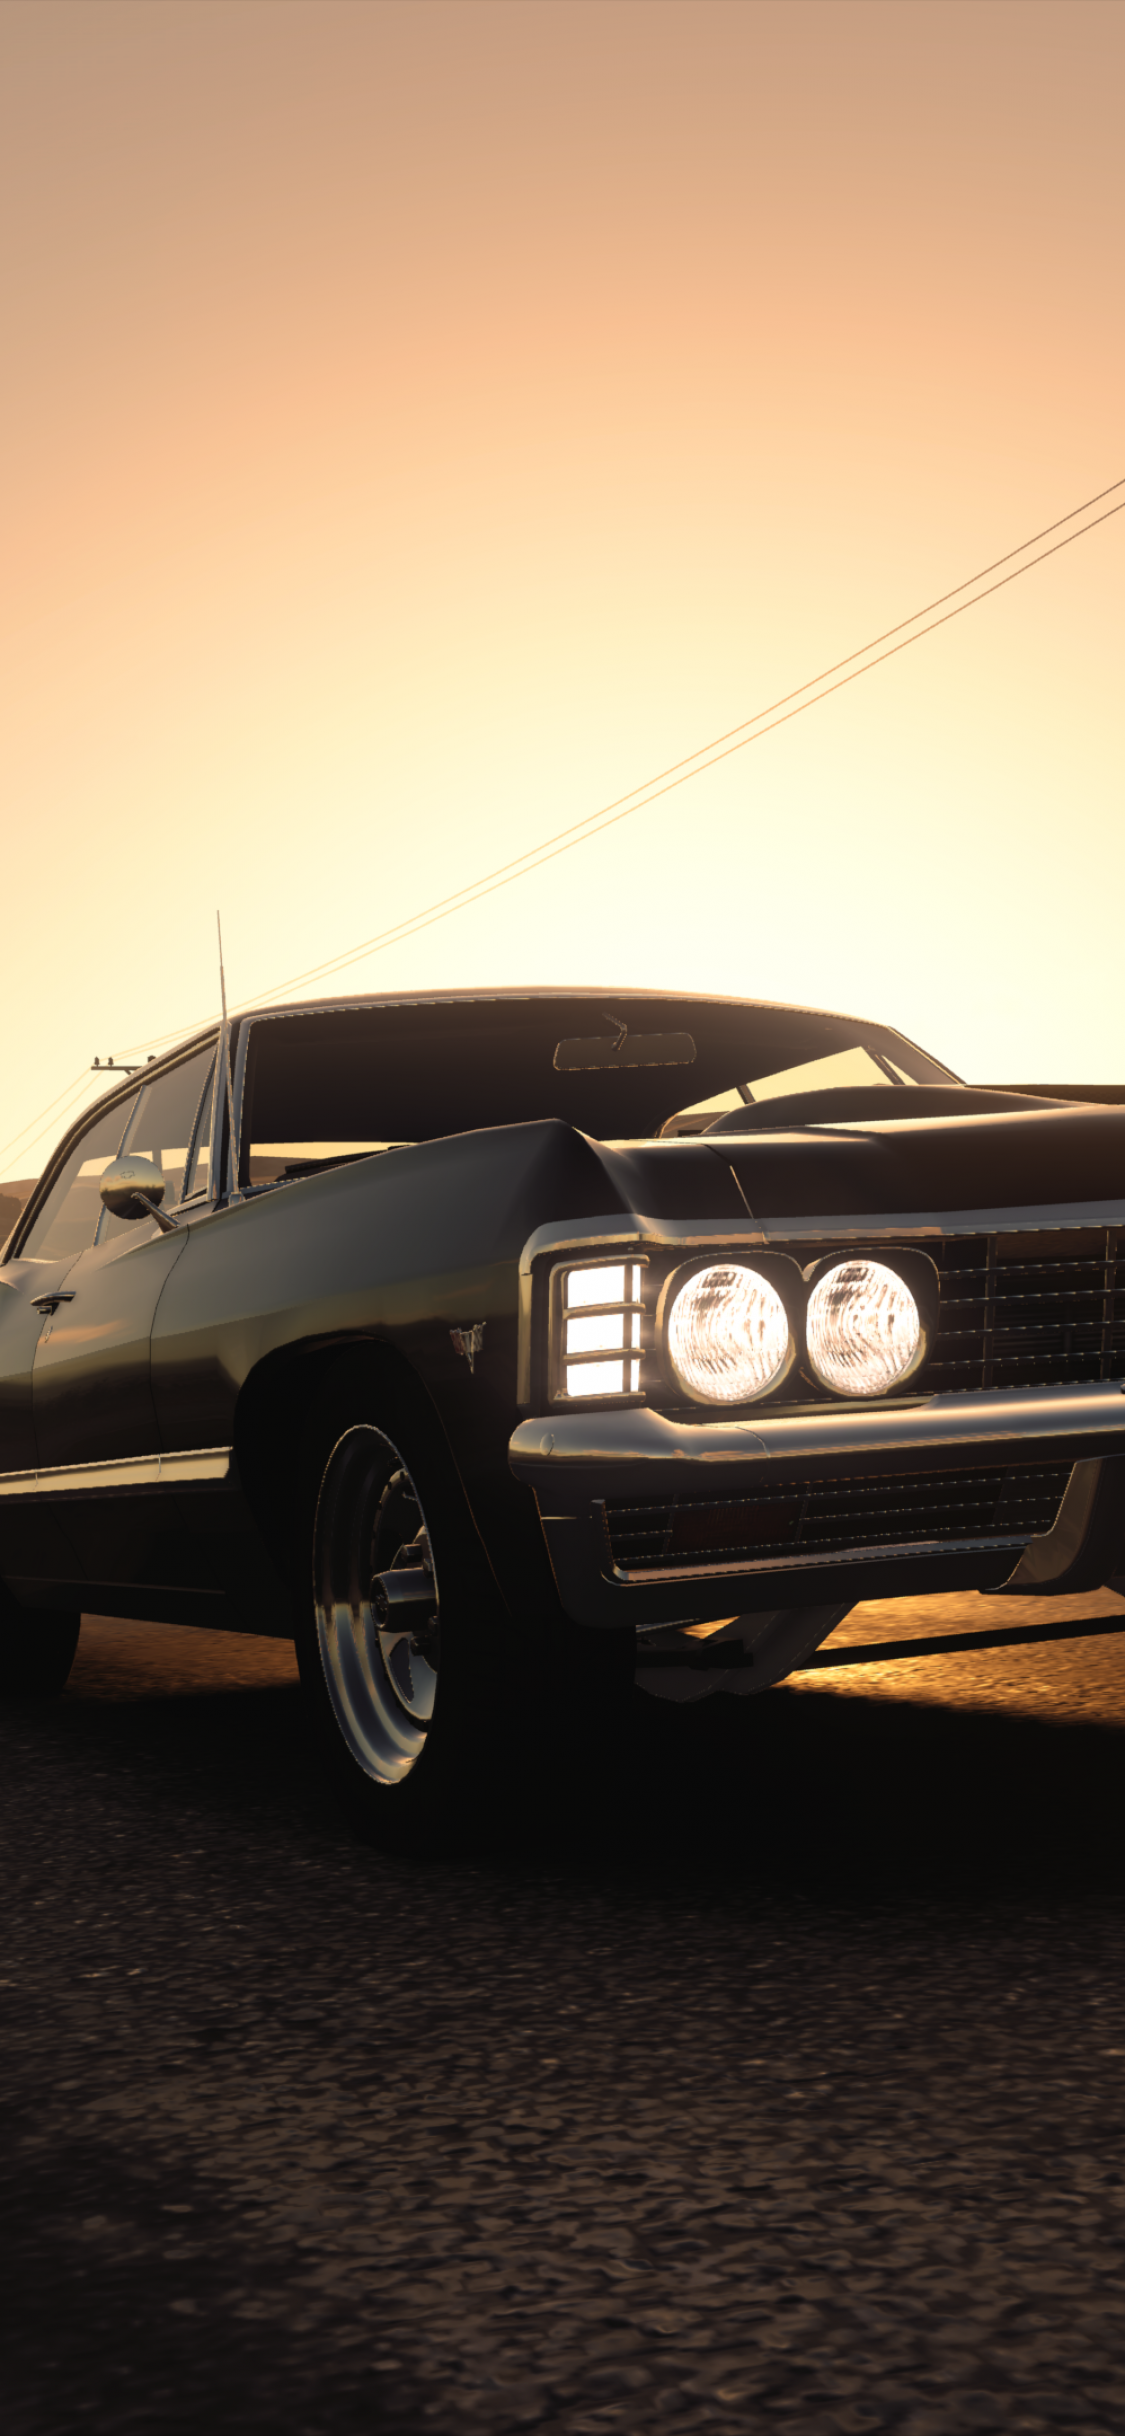 Download 1125x2436 The Crew, Chevrolet Impala, Front View